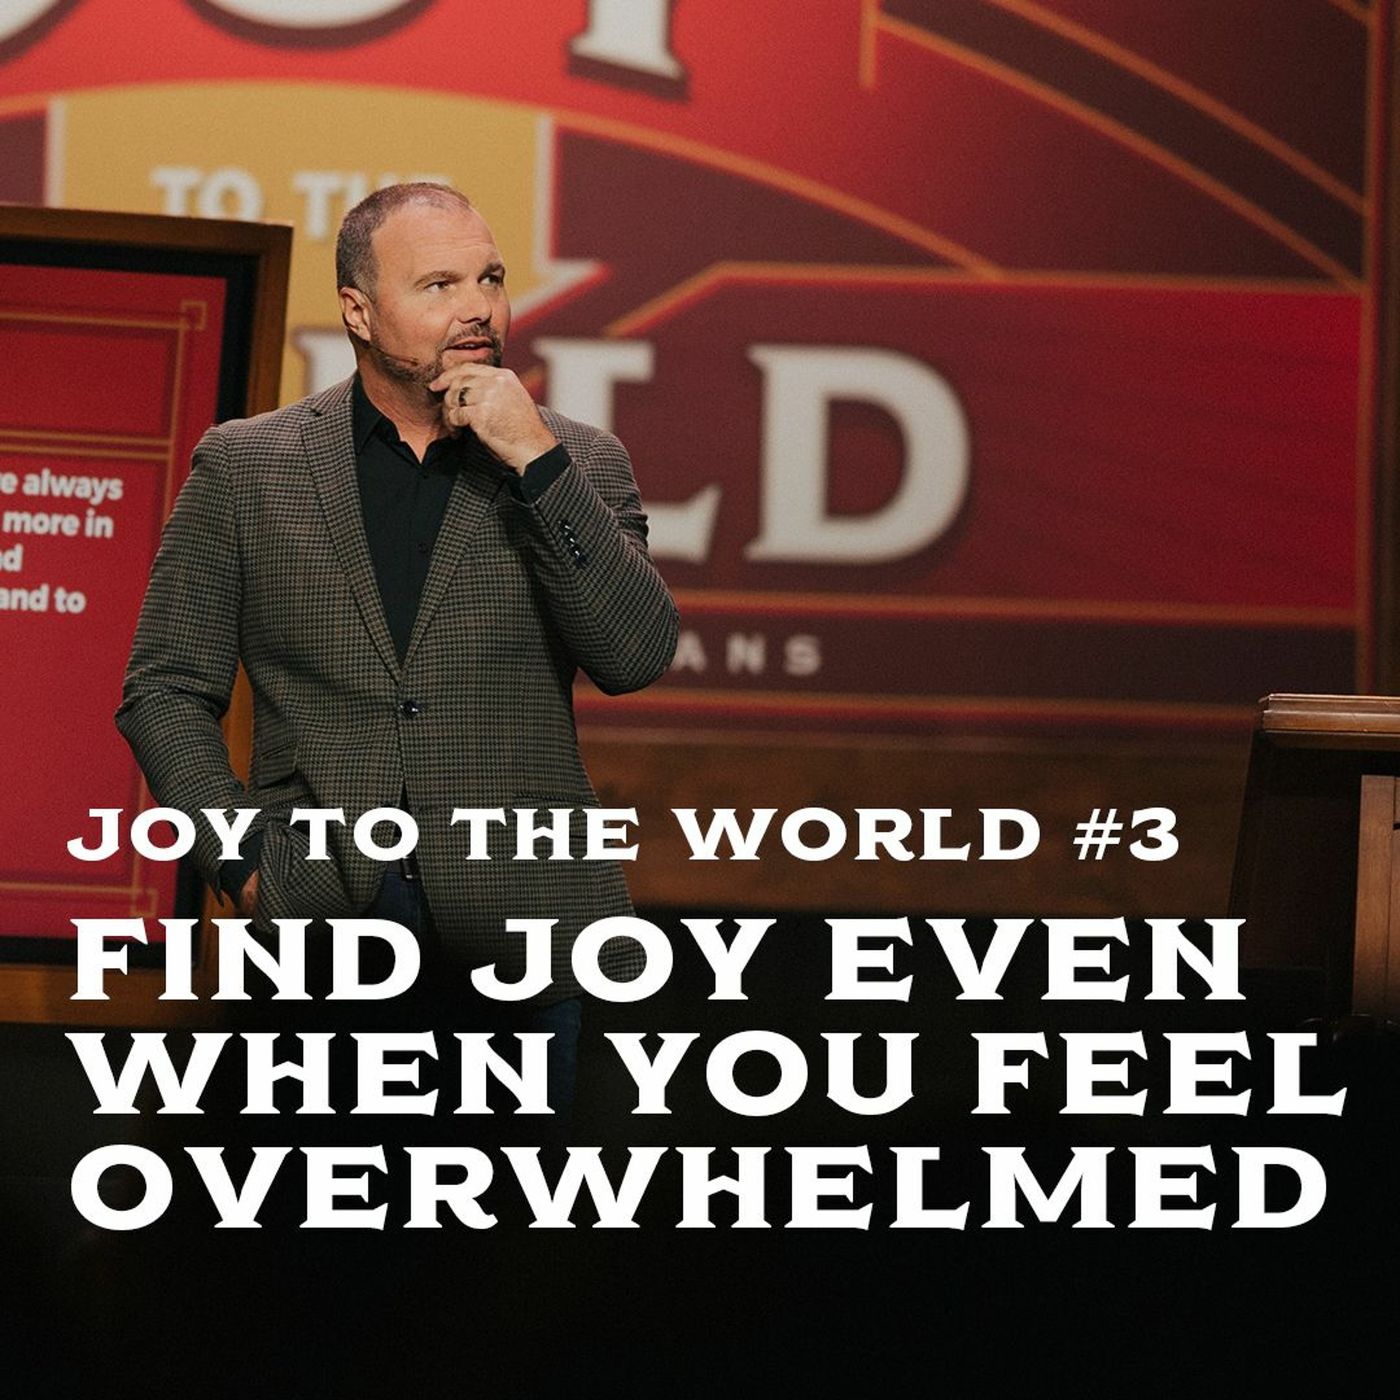 Joy To The World #3 - Find Joy Even When You Feel Overwhelmed